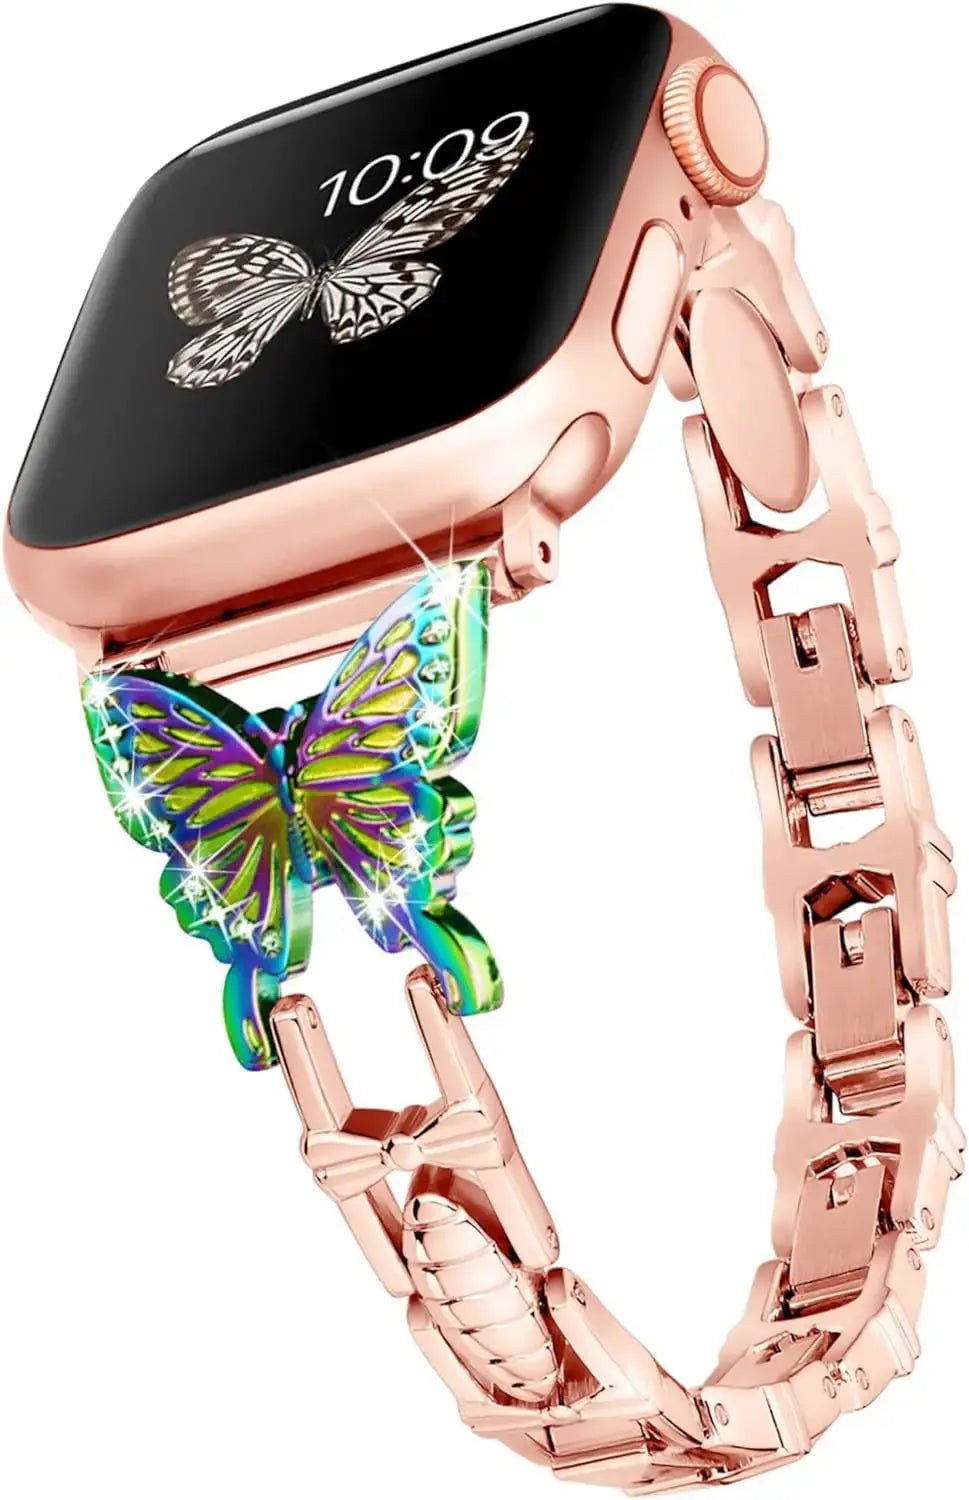 FlutterGlimmer Diamond Butterfly Band for Apple Watch - Pinnacle Luxuries